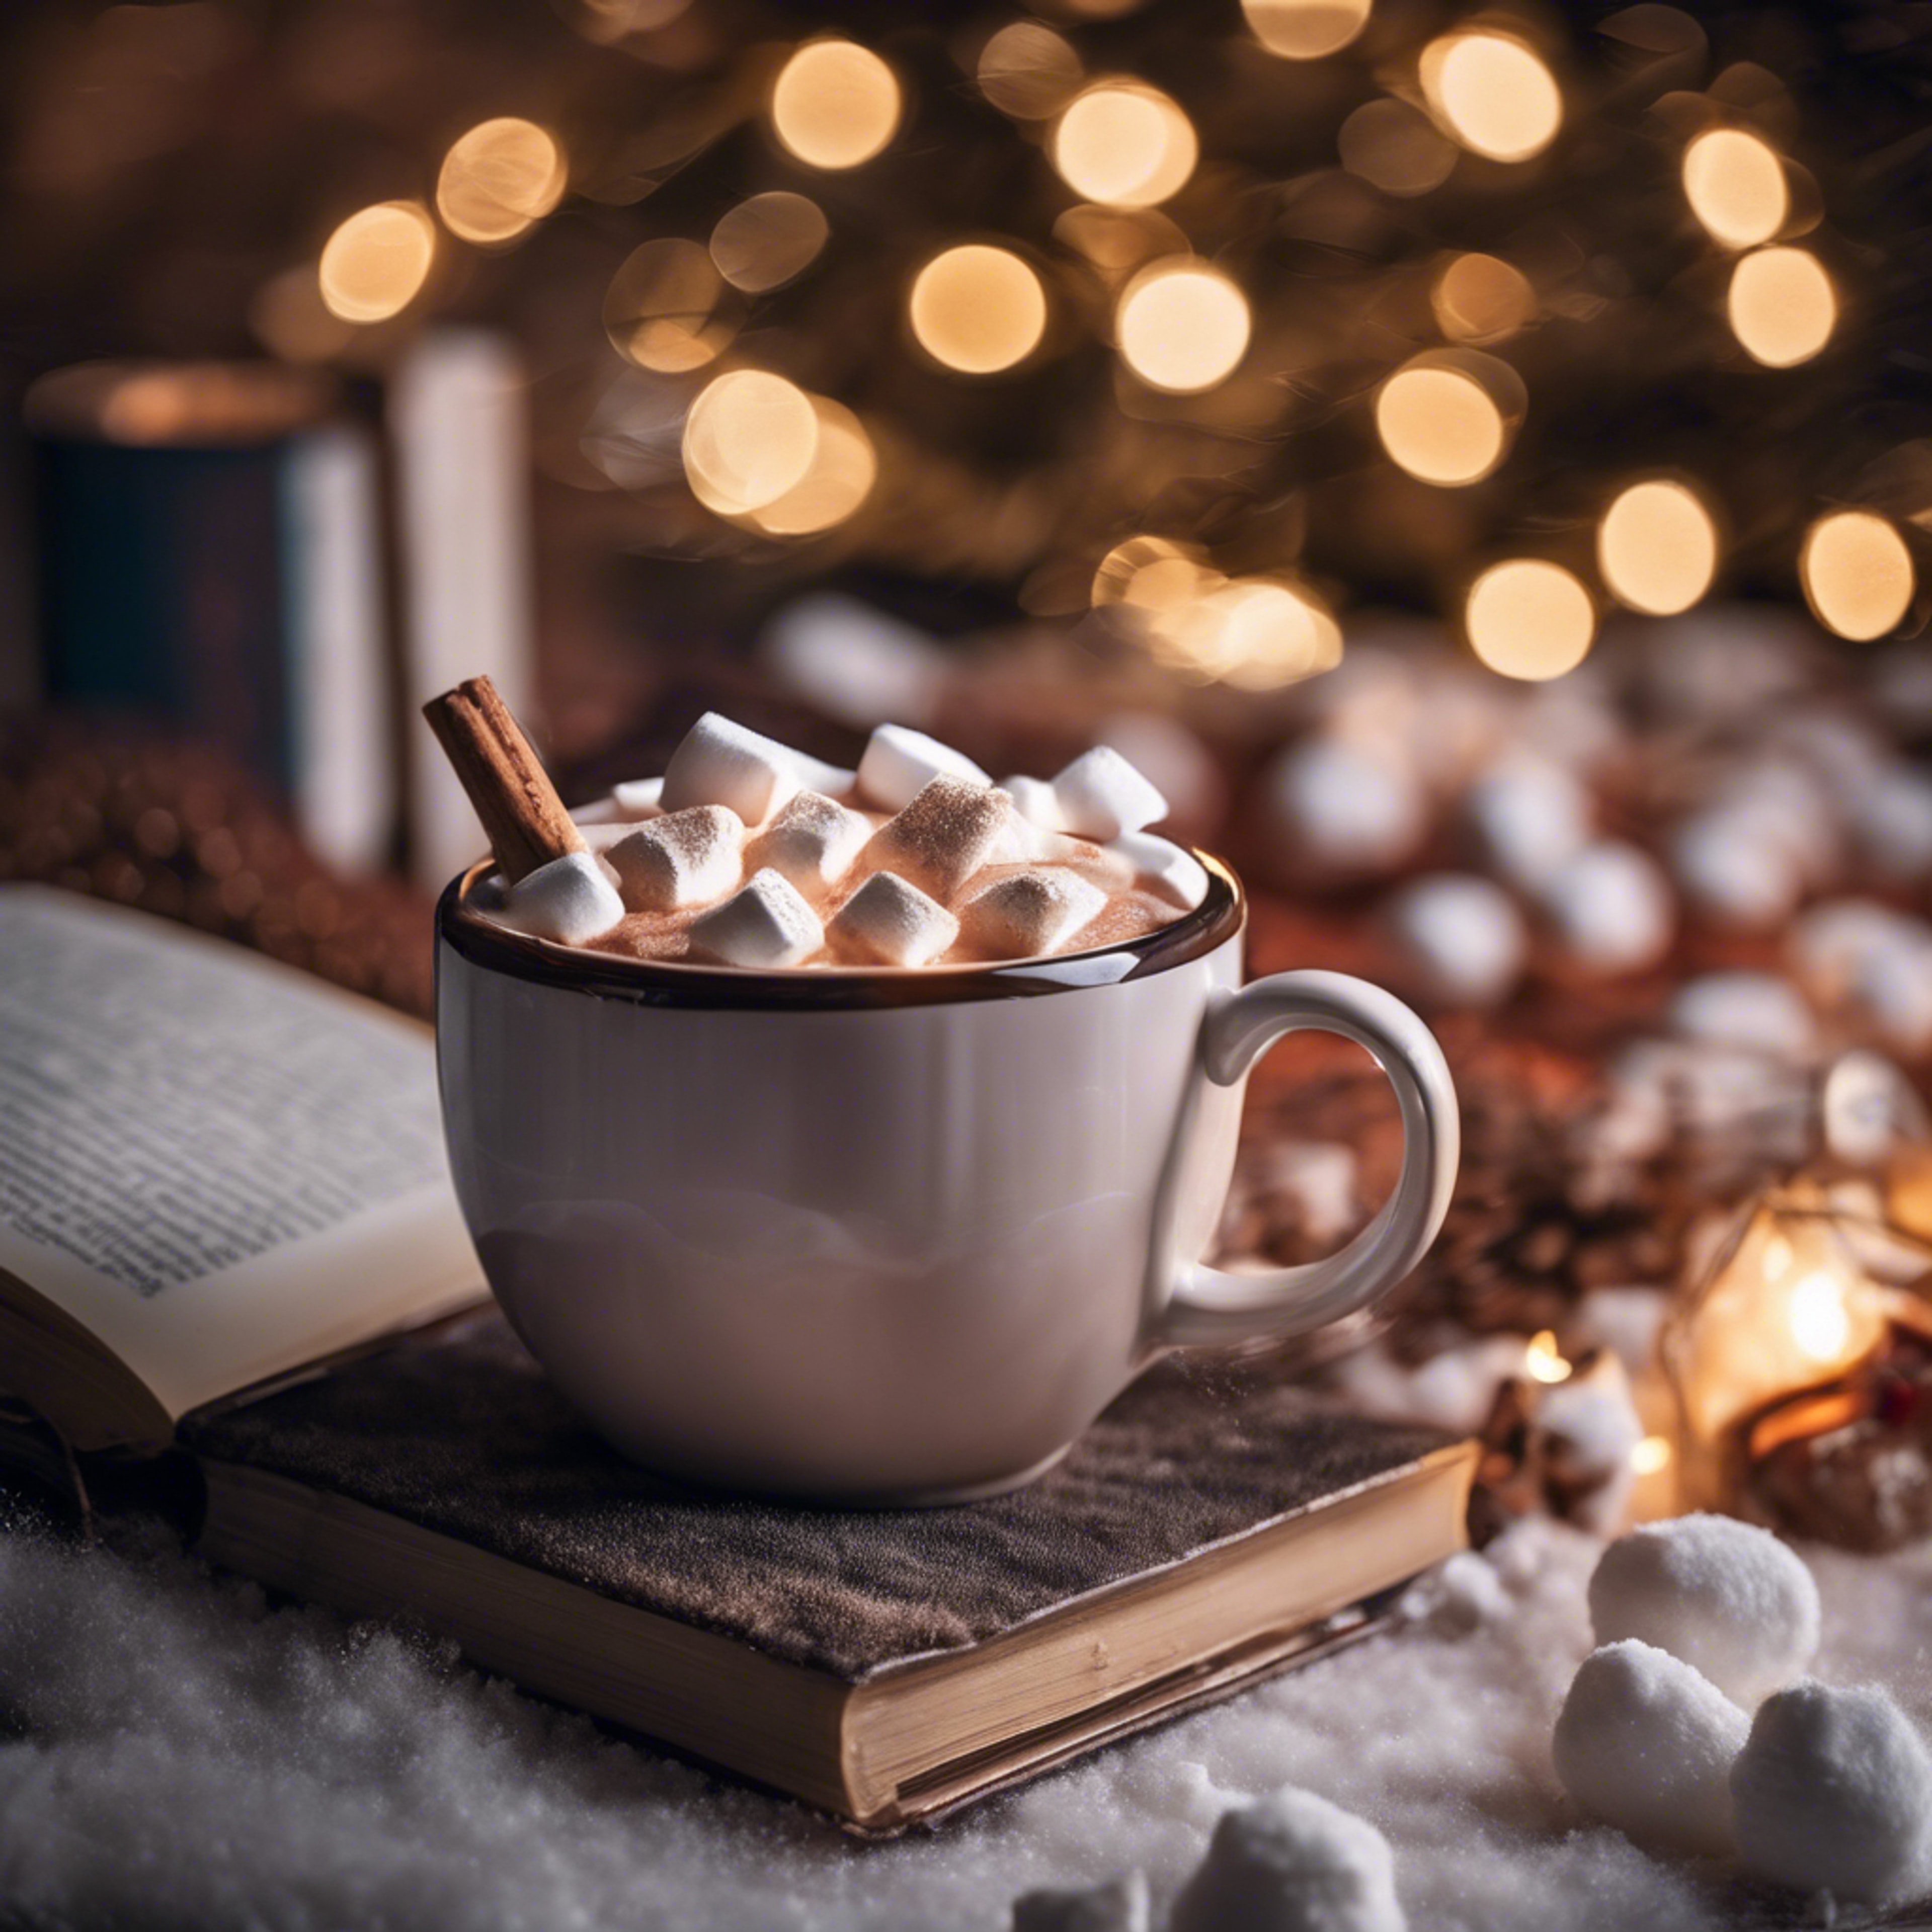 A steaming mug of hot cocoa topped with marshmallows, paired with a good book on a winter night. Tapeta[bb1918feb58c4b029e23]